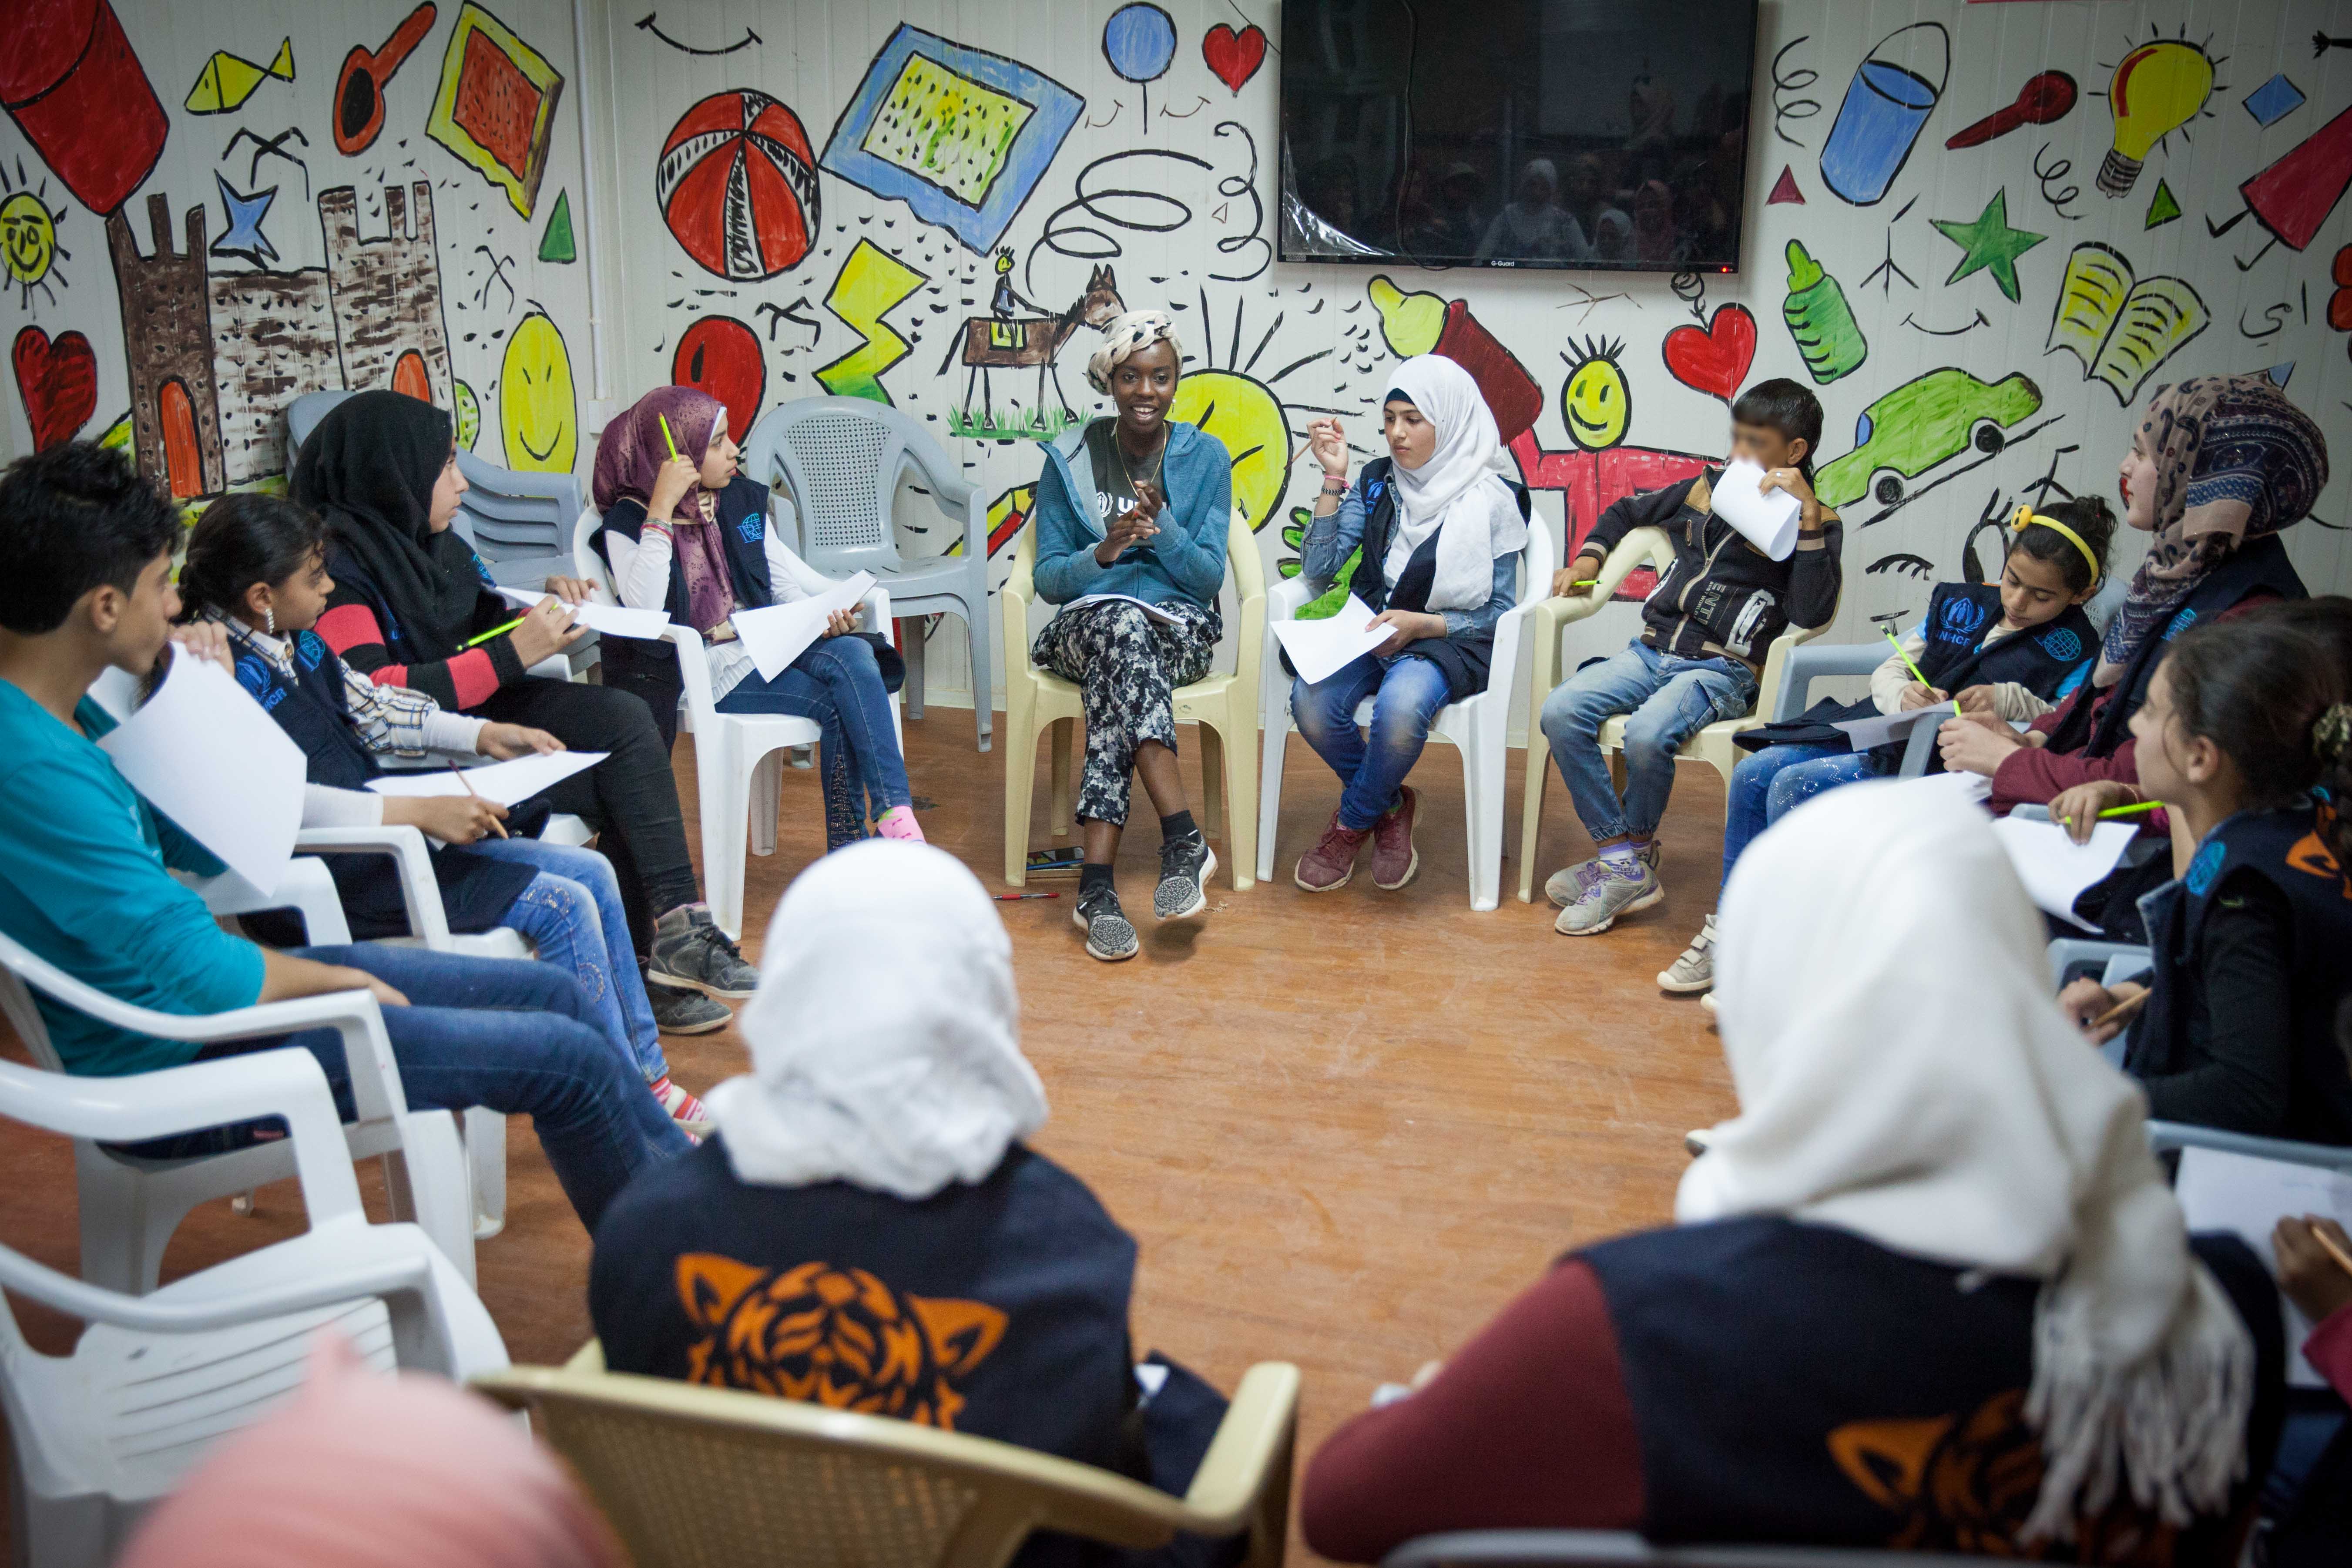 UNHCR High Profile Supporter Emi Mahmoud conducts a poetry workshop with girls and boys at the community center in Zaatari camp, Jordan. ; UNHCR High Profile Supporter Emi Mahmoud visists Syrian refugees in Jordan